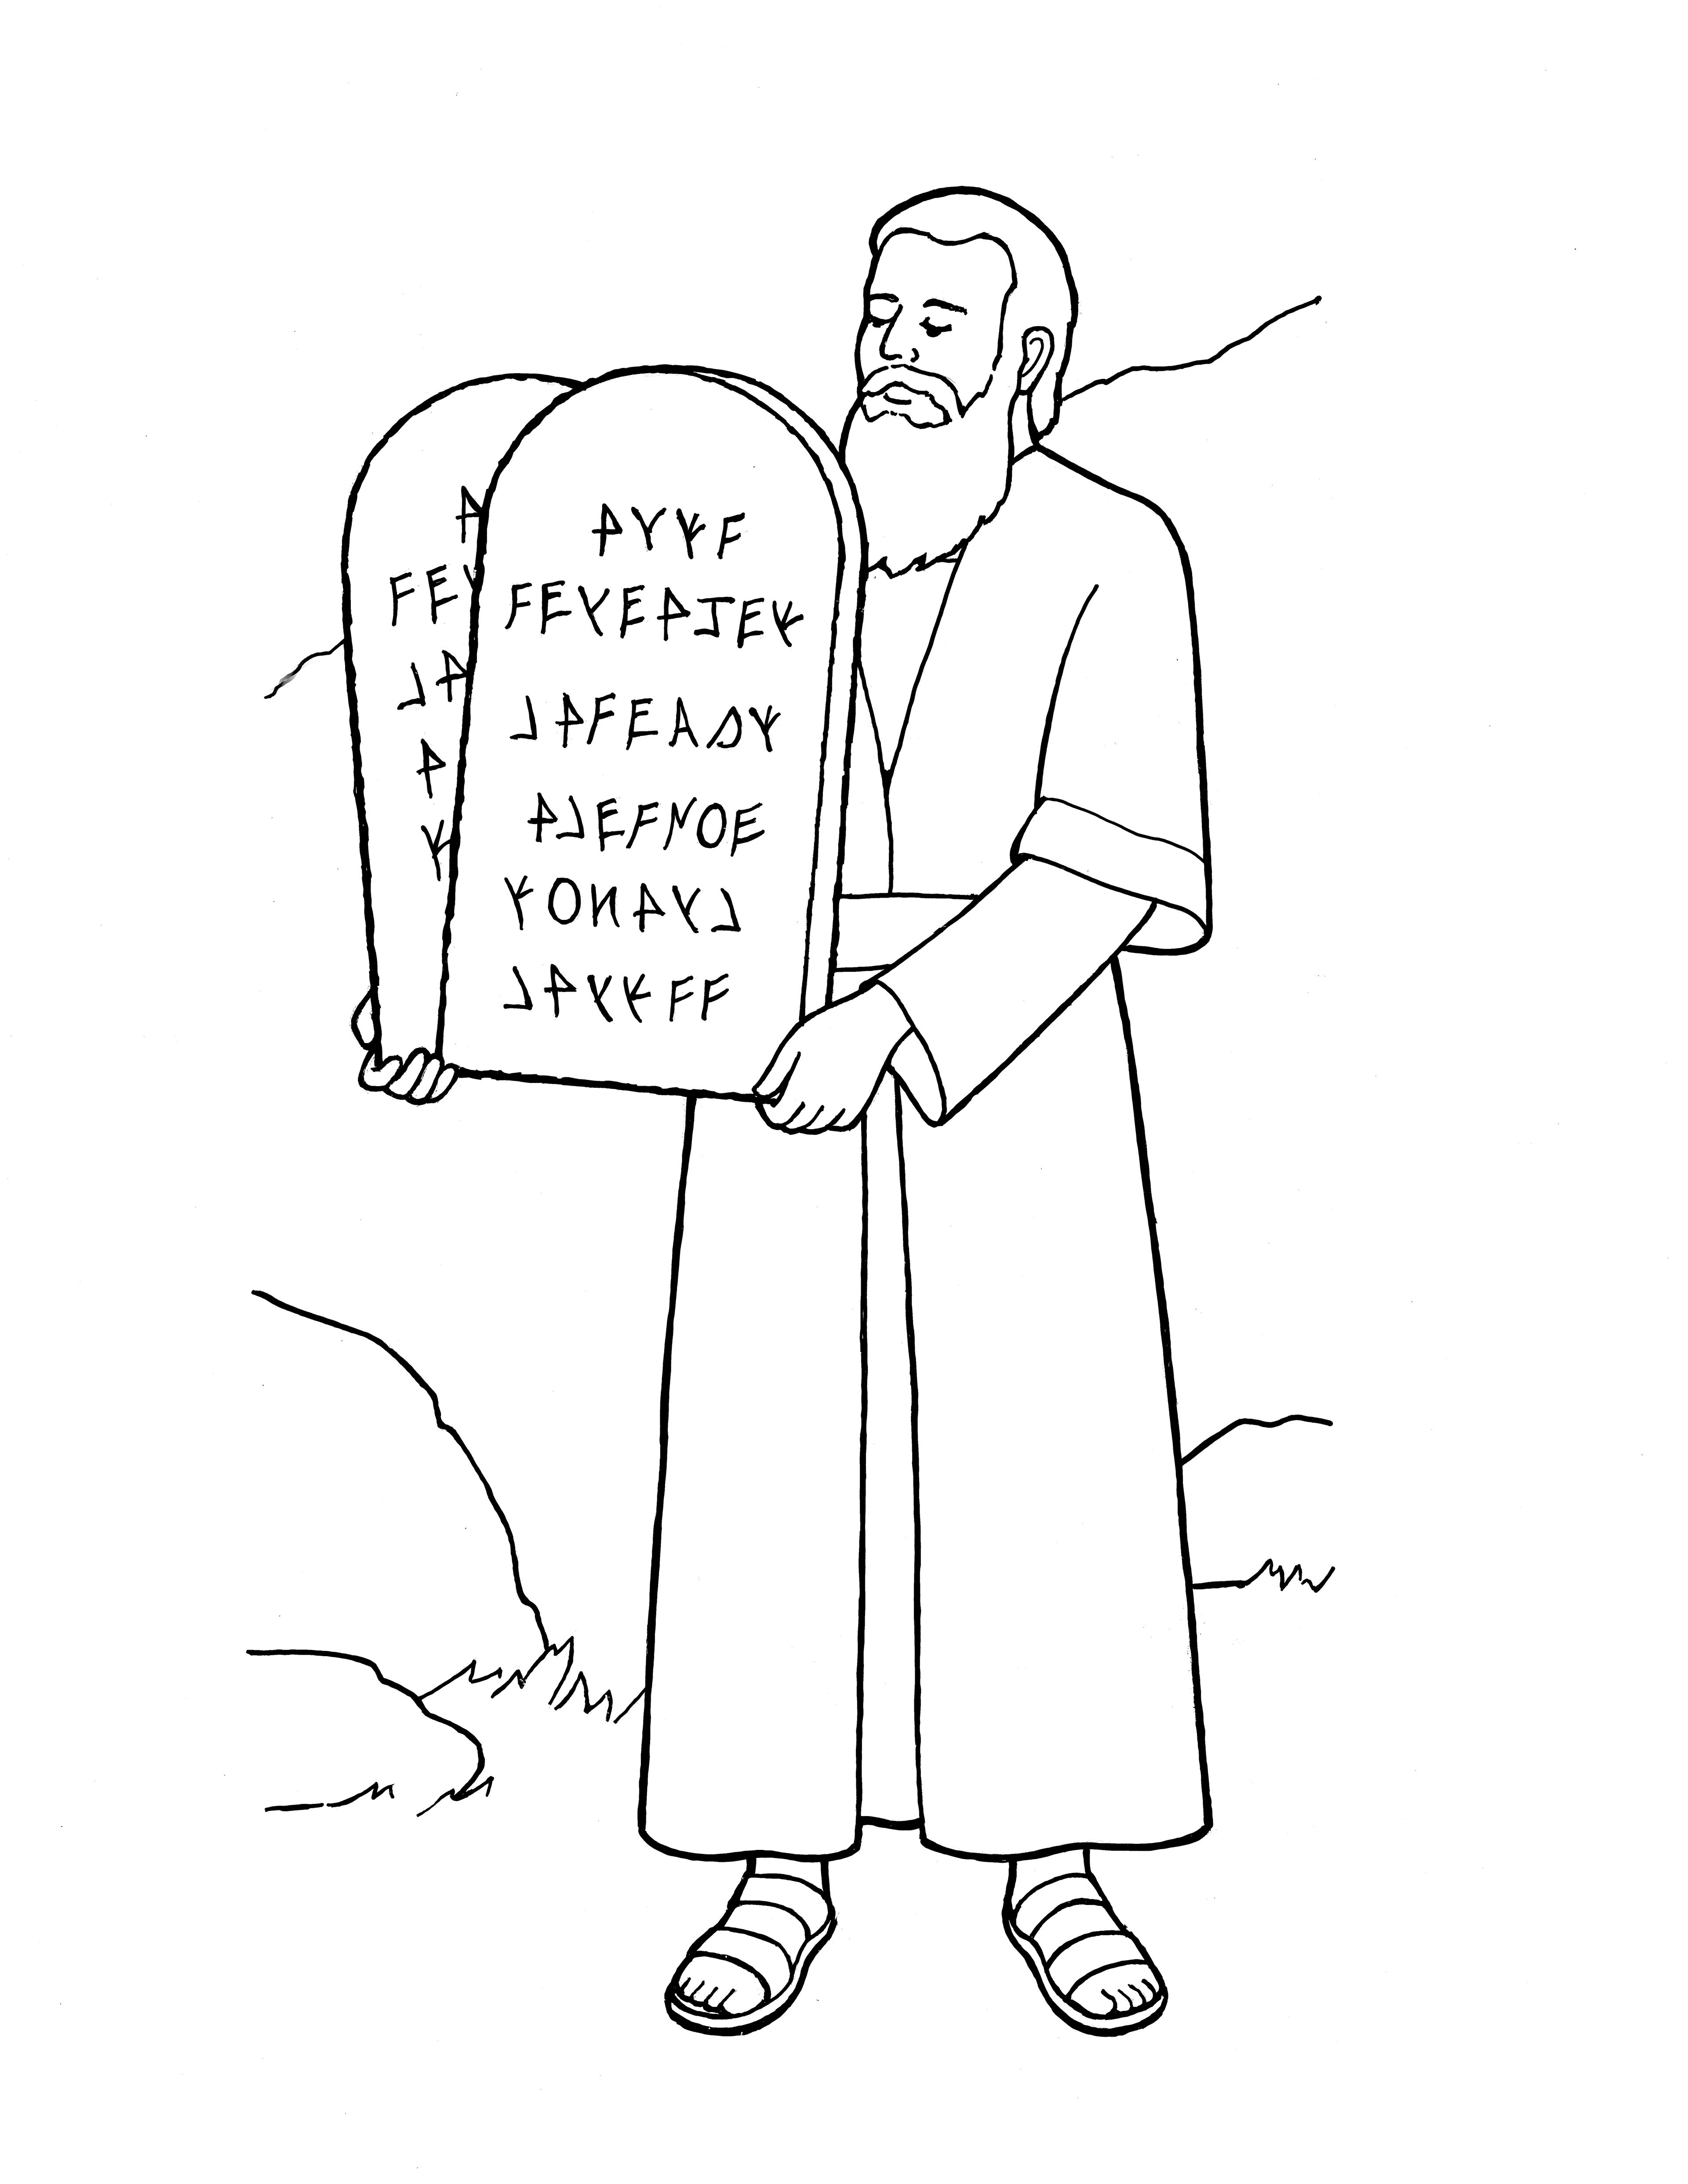 An illustration of Moses holding the tablets of the Ten Commandments, from the nursery manual Behold Your Little Ones (2008), page 99.